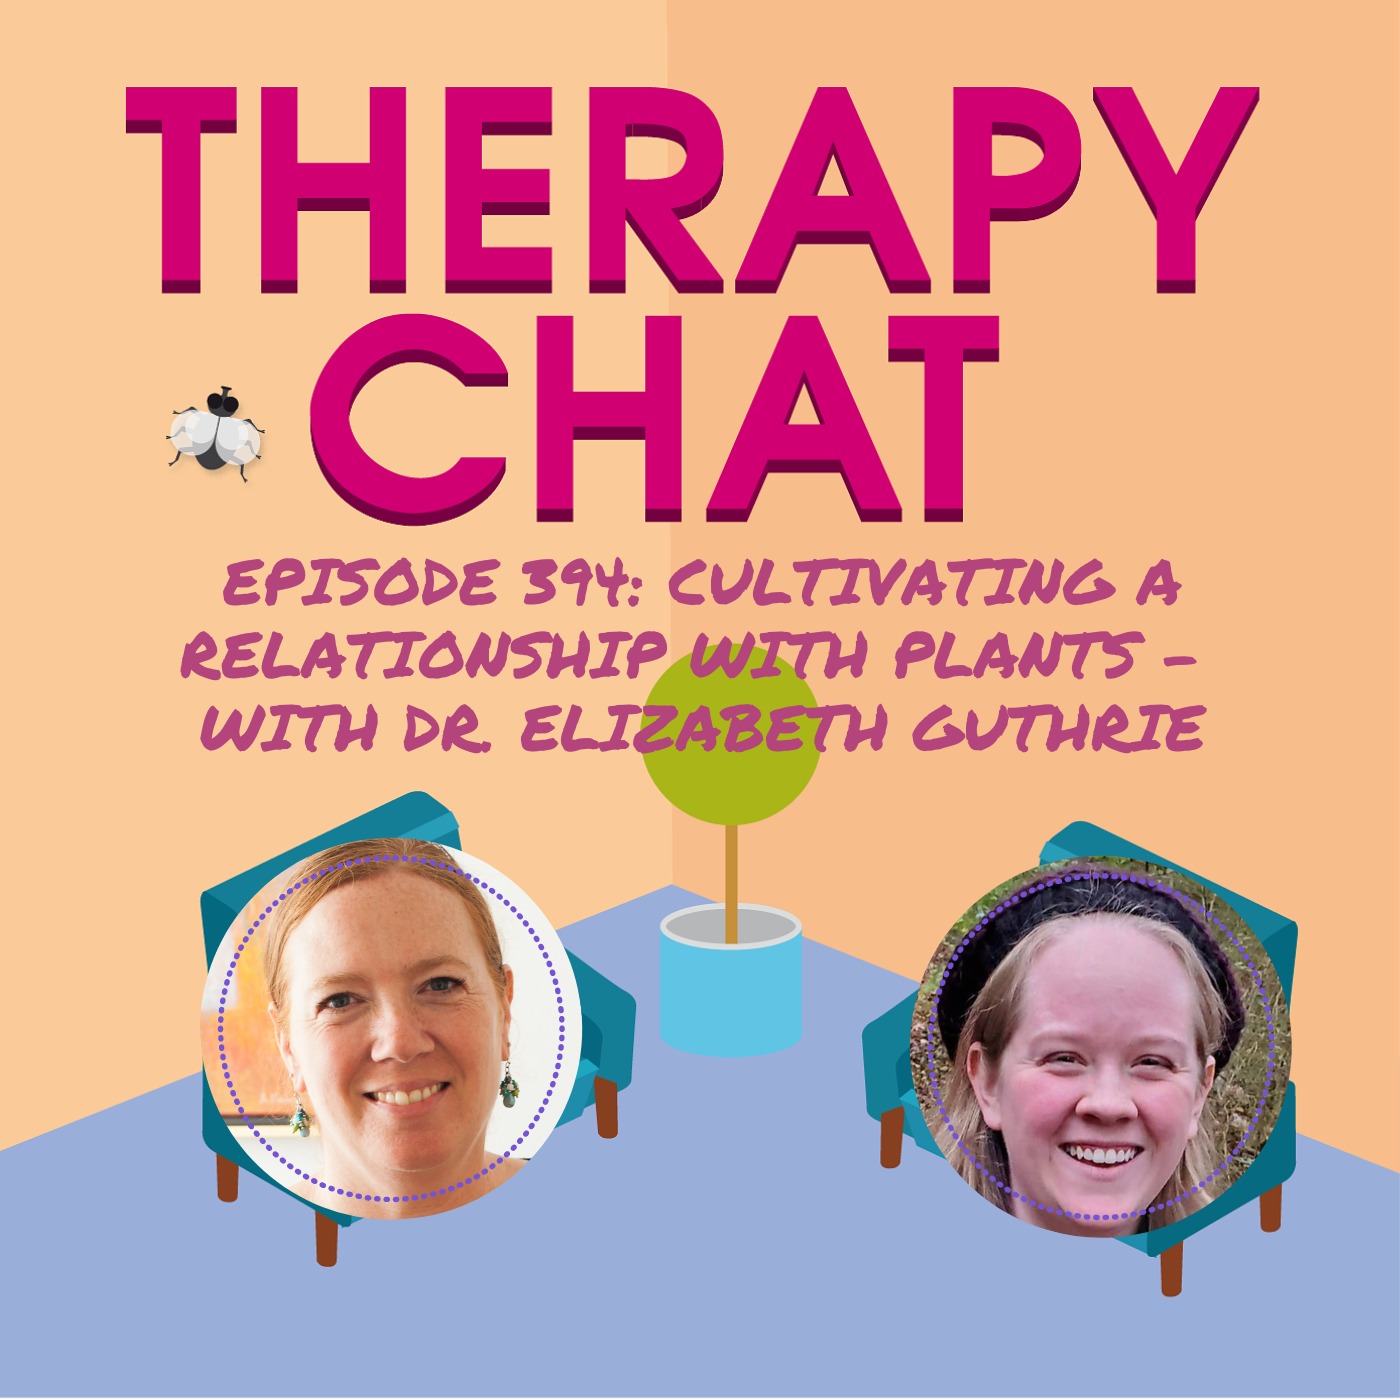 394: Cultivating A Relationship With Plants - With Dr. Elizabeth Guthrie